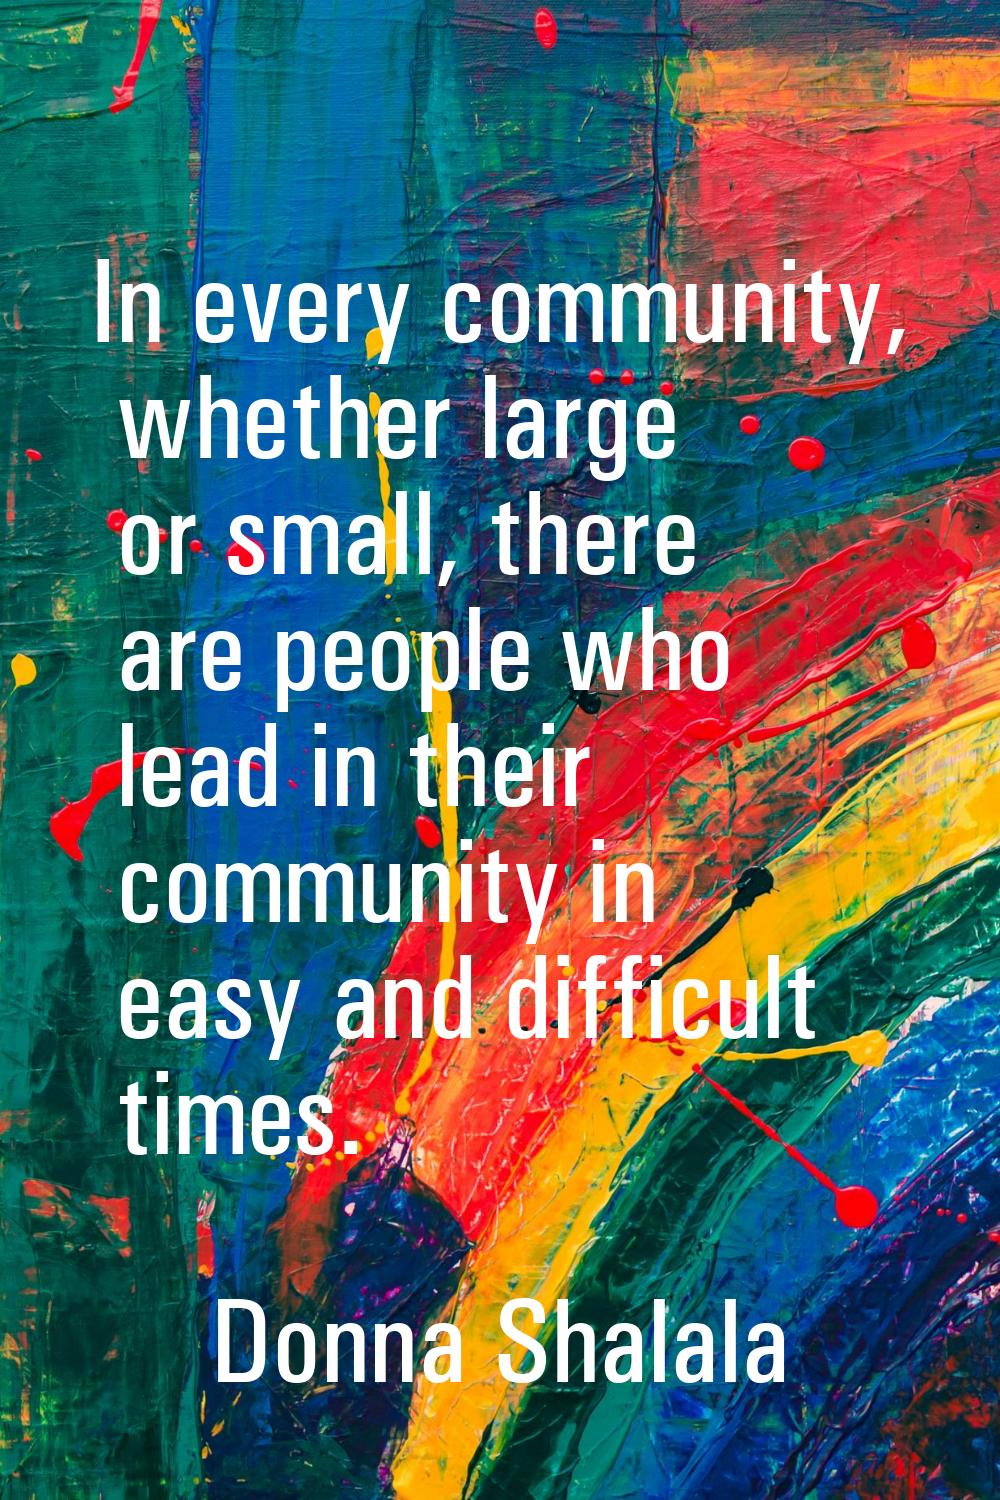 In every community, whether large or small, there are people who lead in their community in easy an